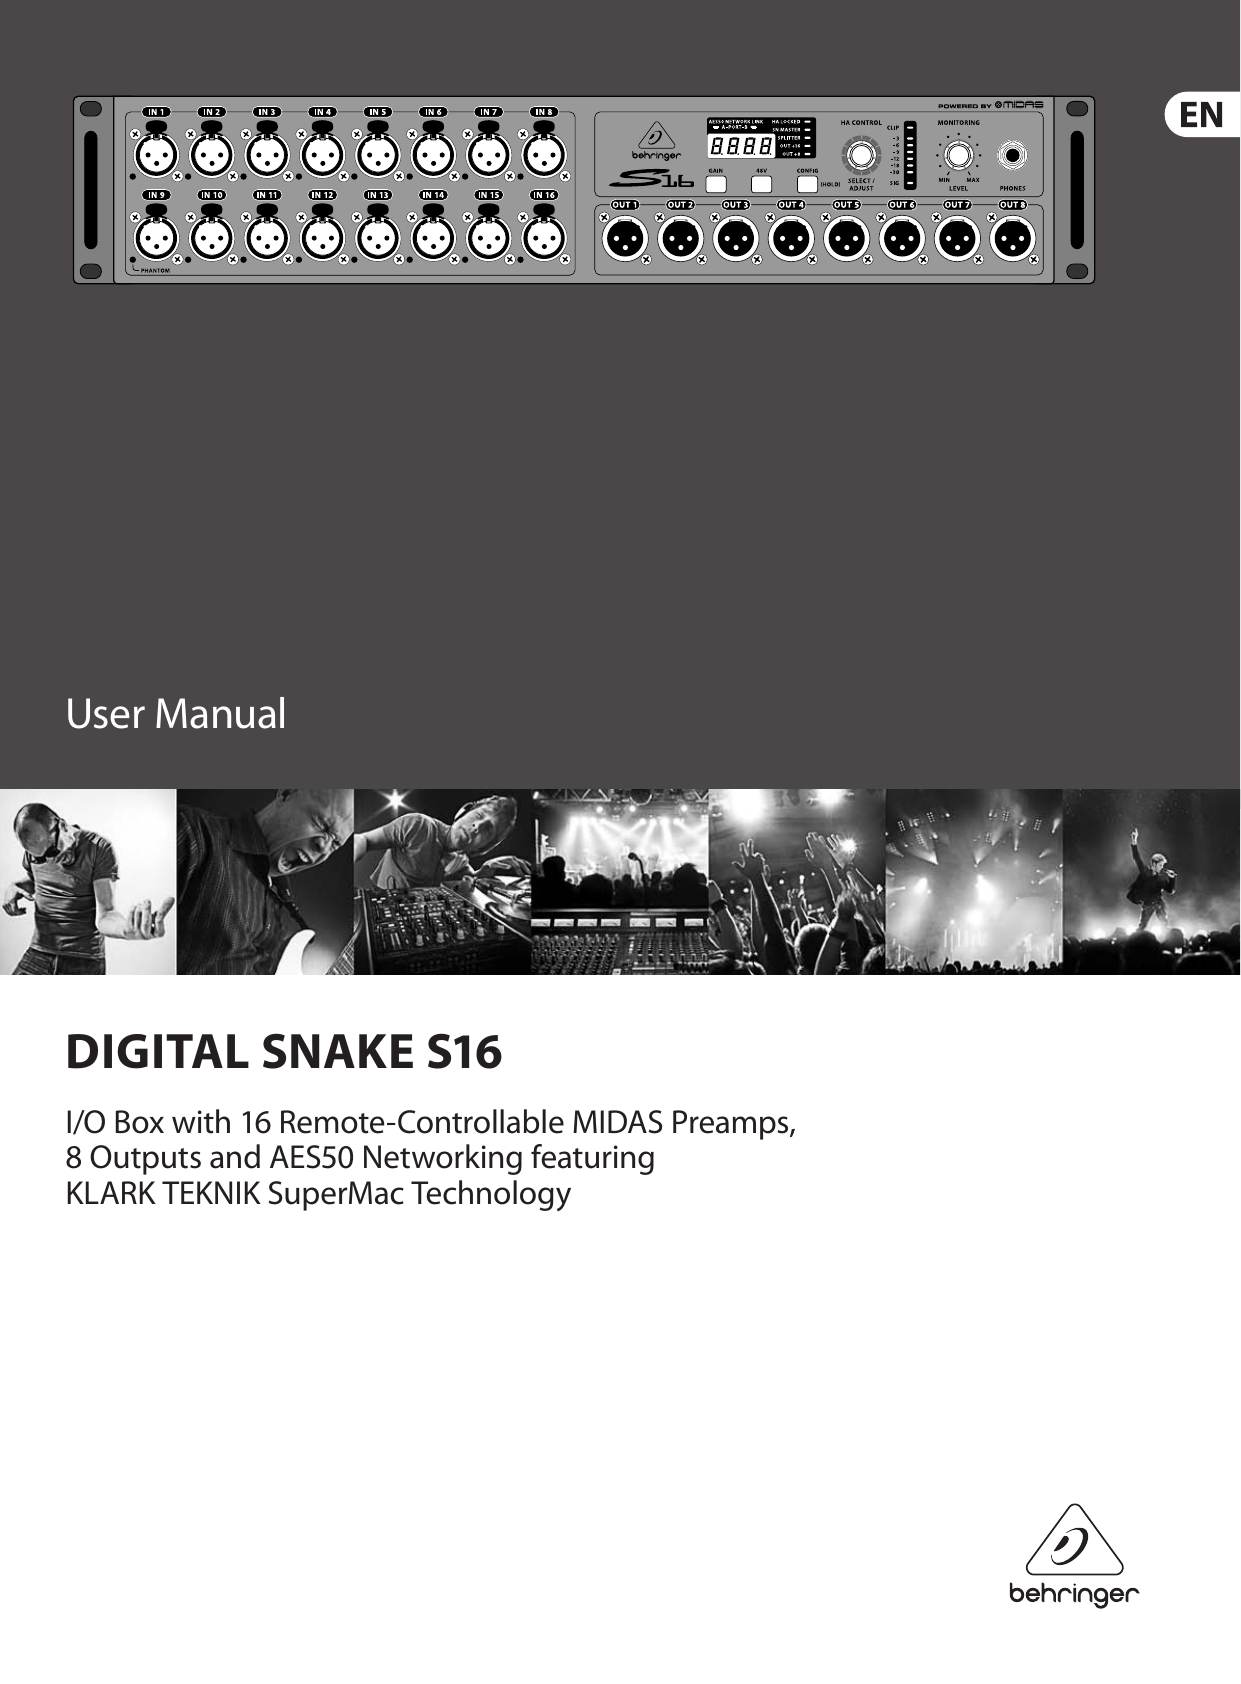 Page 1 of 9 - Behringer Behringer-S16-Users-Manual- DIGITAL SNAKE S16  Behringer-s16-users-manual